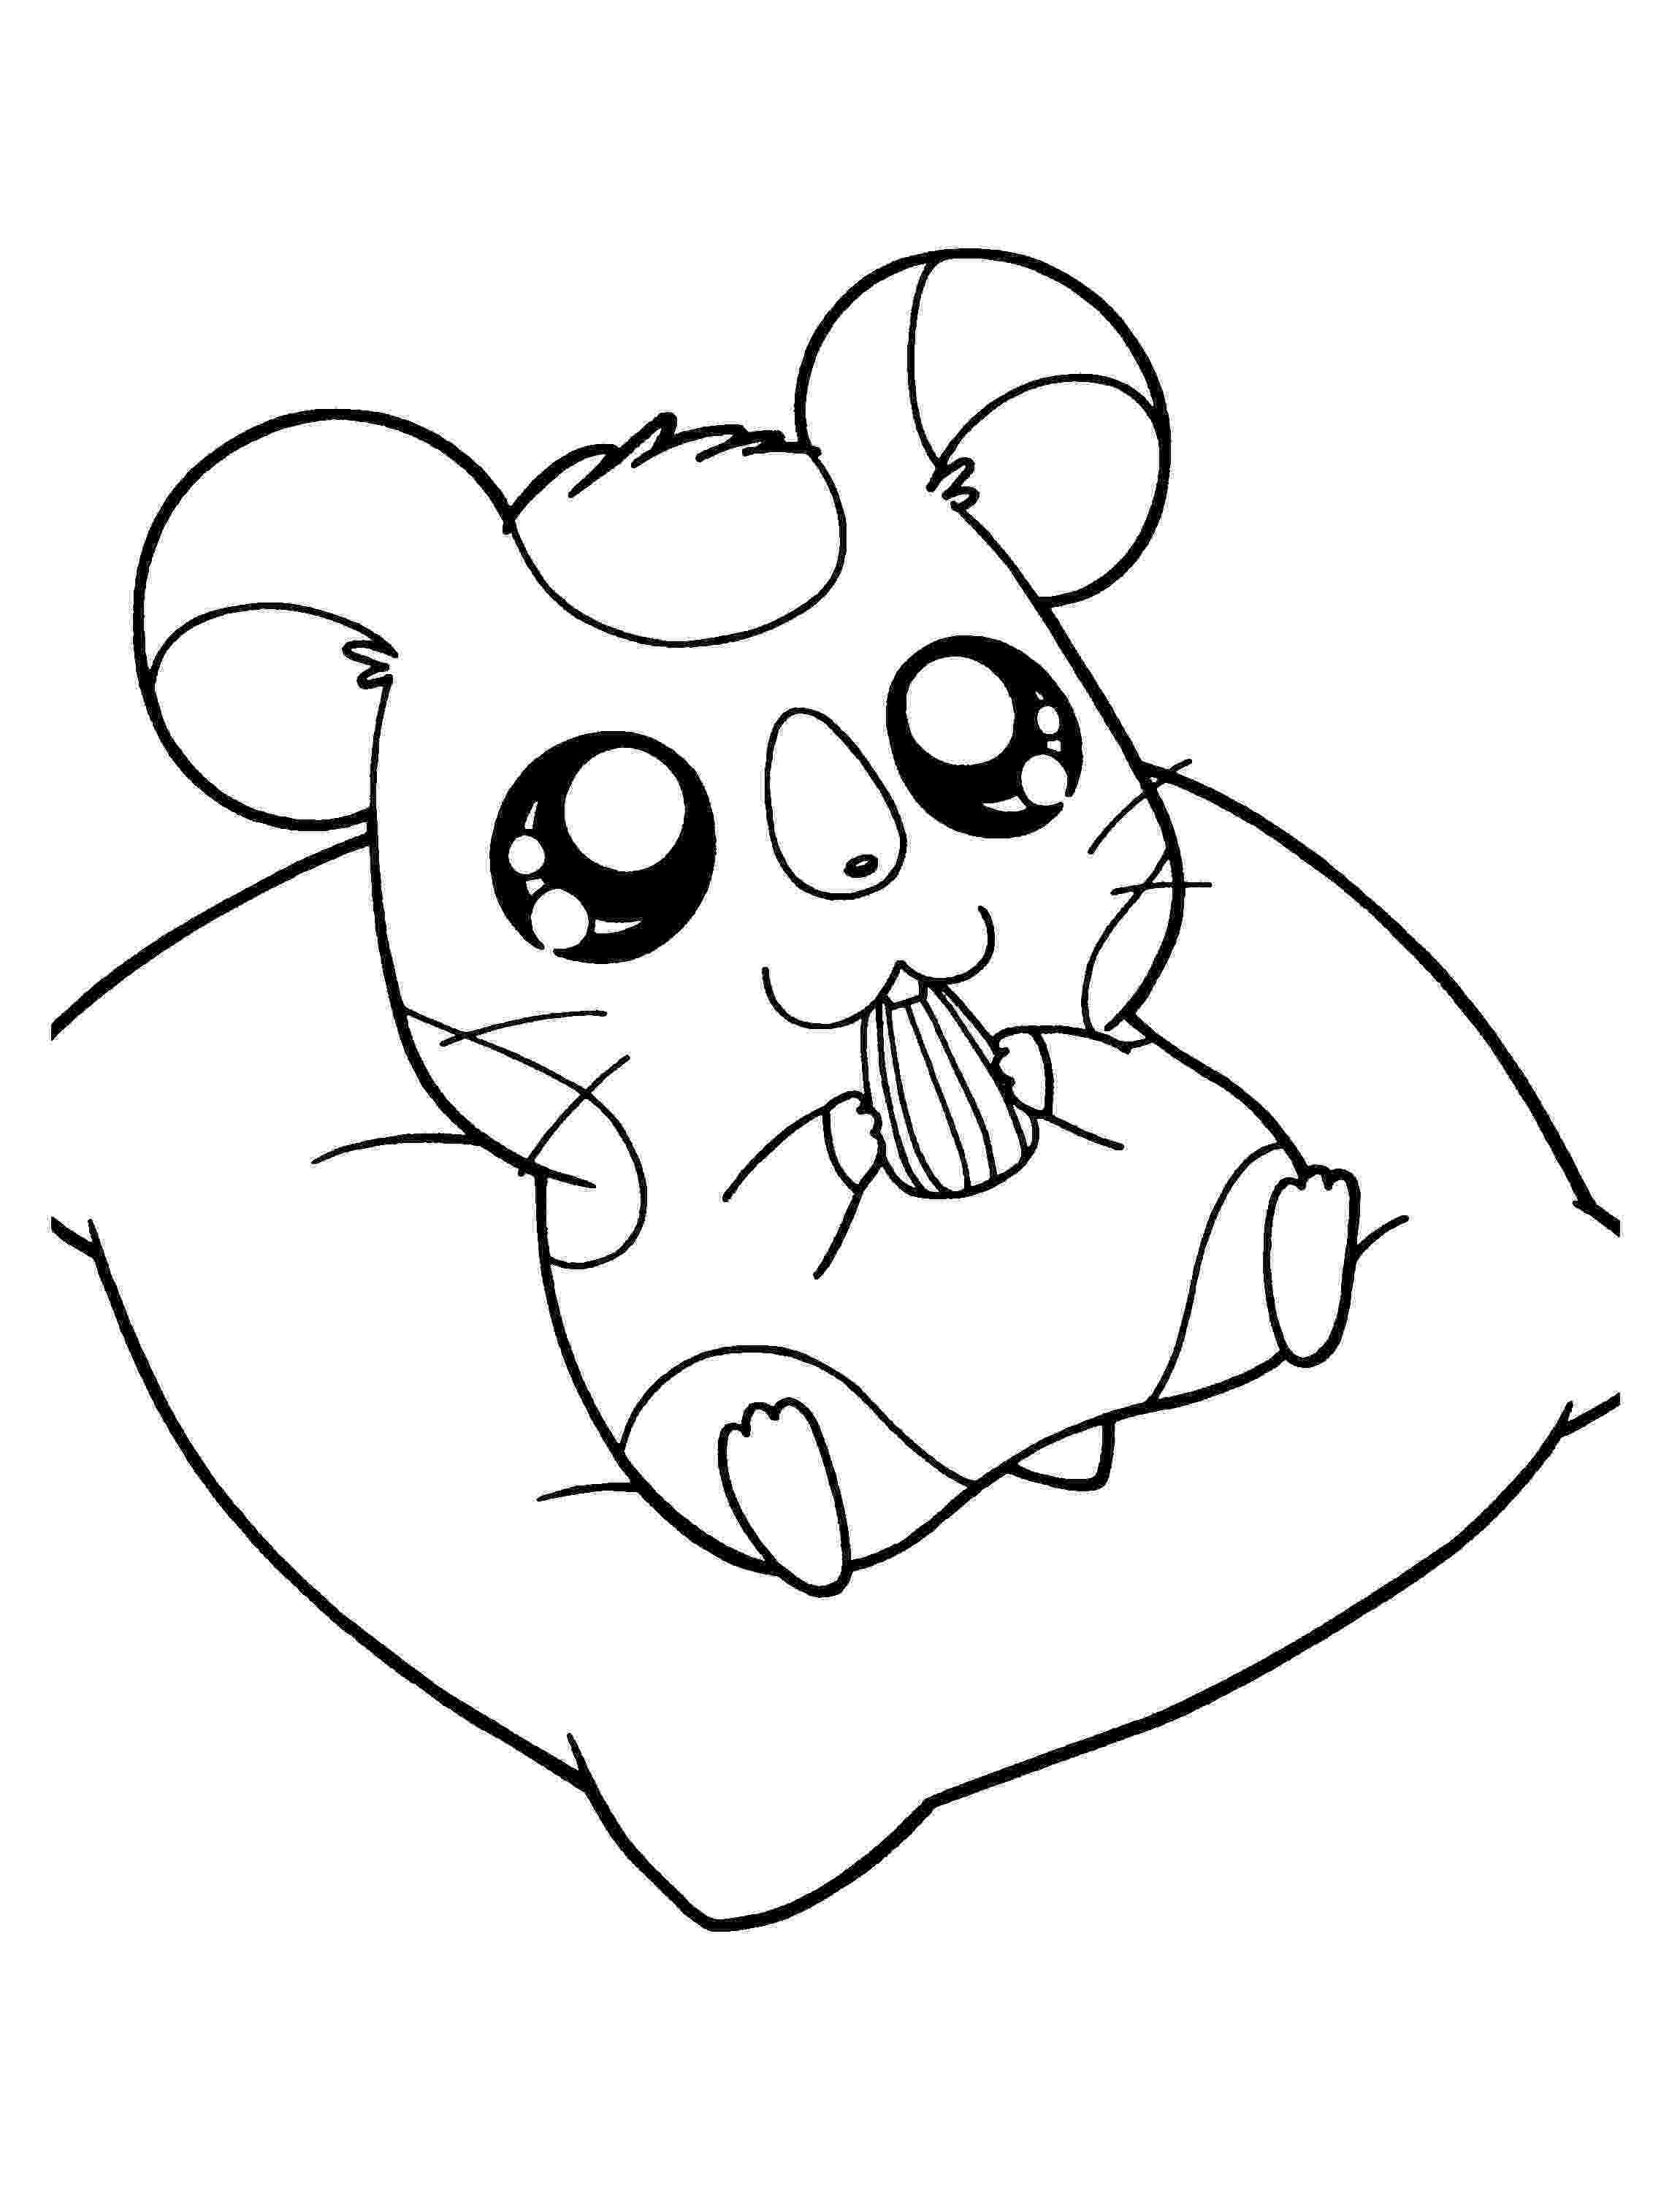 hamster coloring page top 25 free printable hamster coloring pages online page coloring hamster 